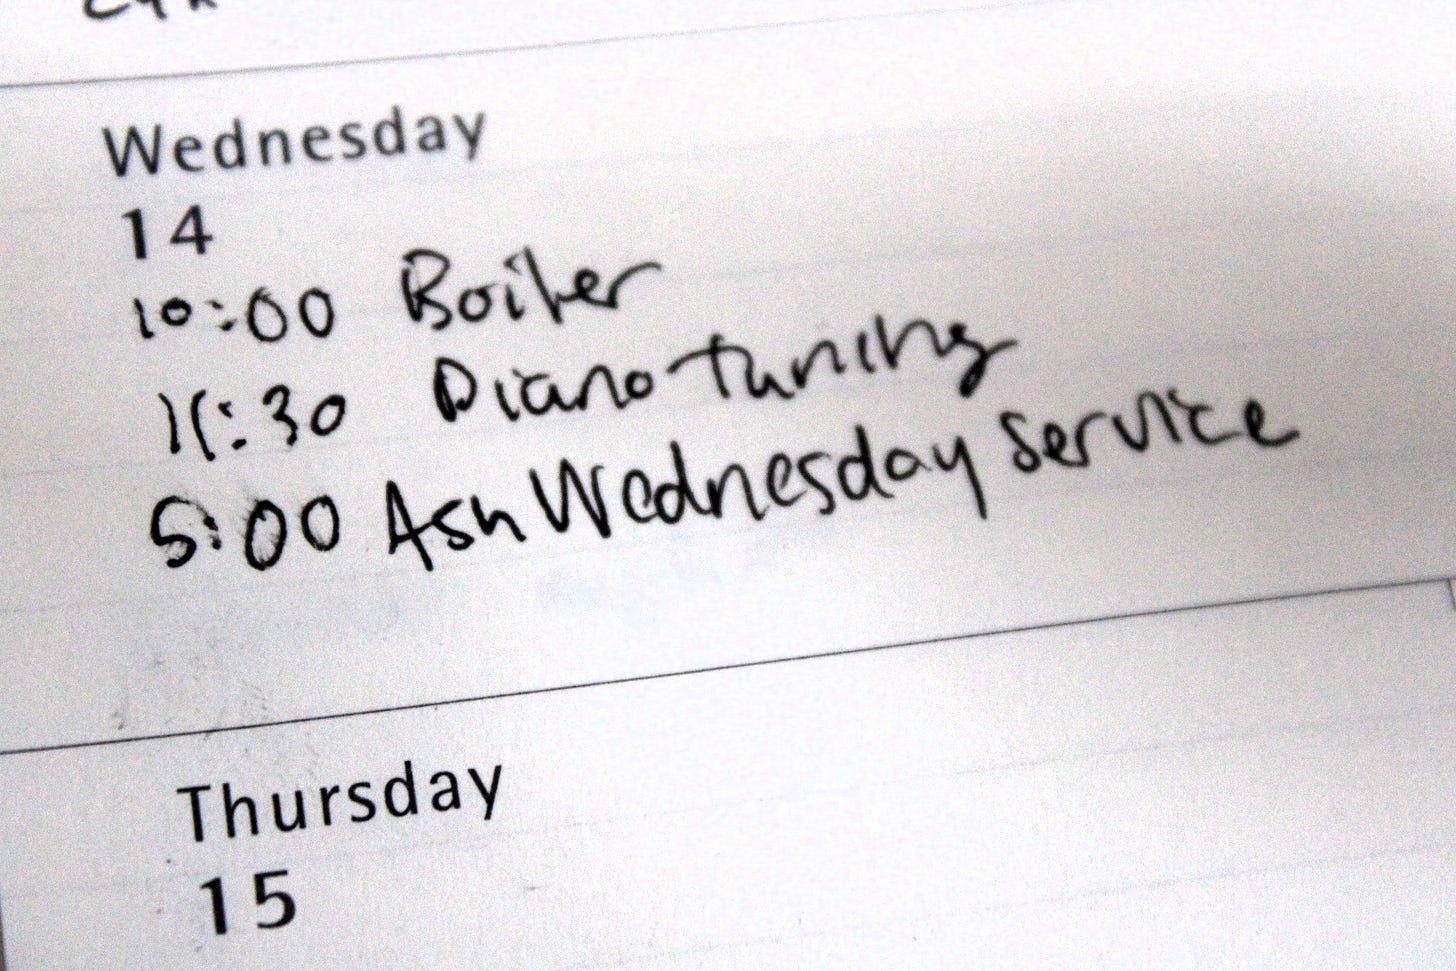 A calendar page for Wednesday, February 14th that says 10:00 Boiler, 11:30 Piano Tuning, and 5:00 Ash Wednesday Service